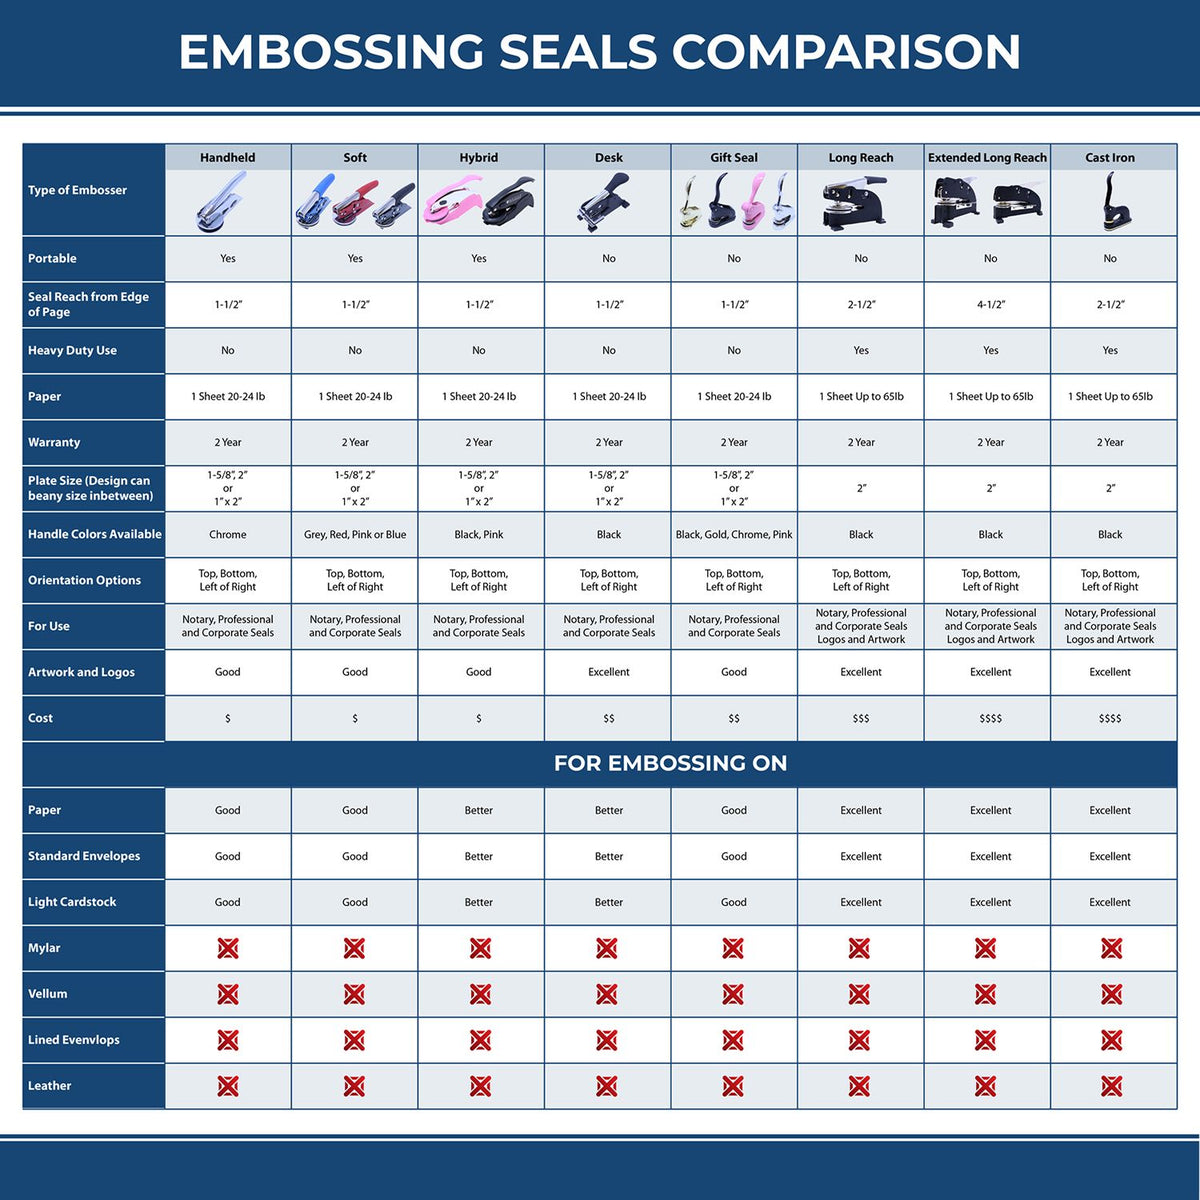 A comparison chart for the different types of mount models available for the Handheld Nebraska Professional Geologist Embosser